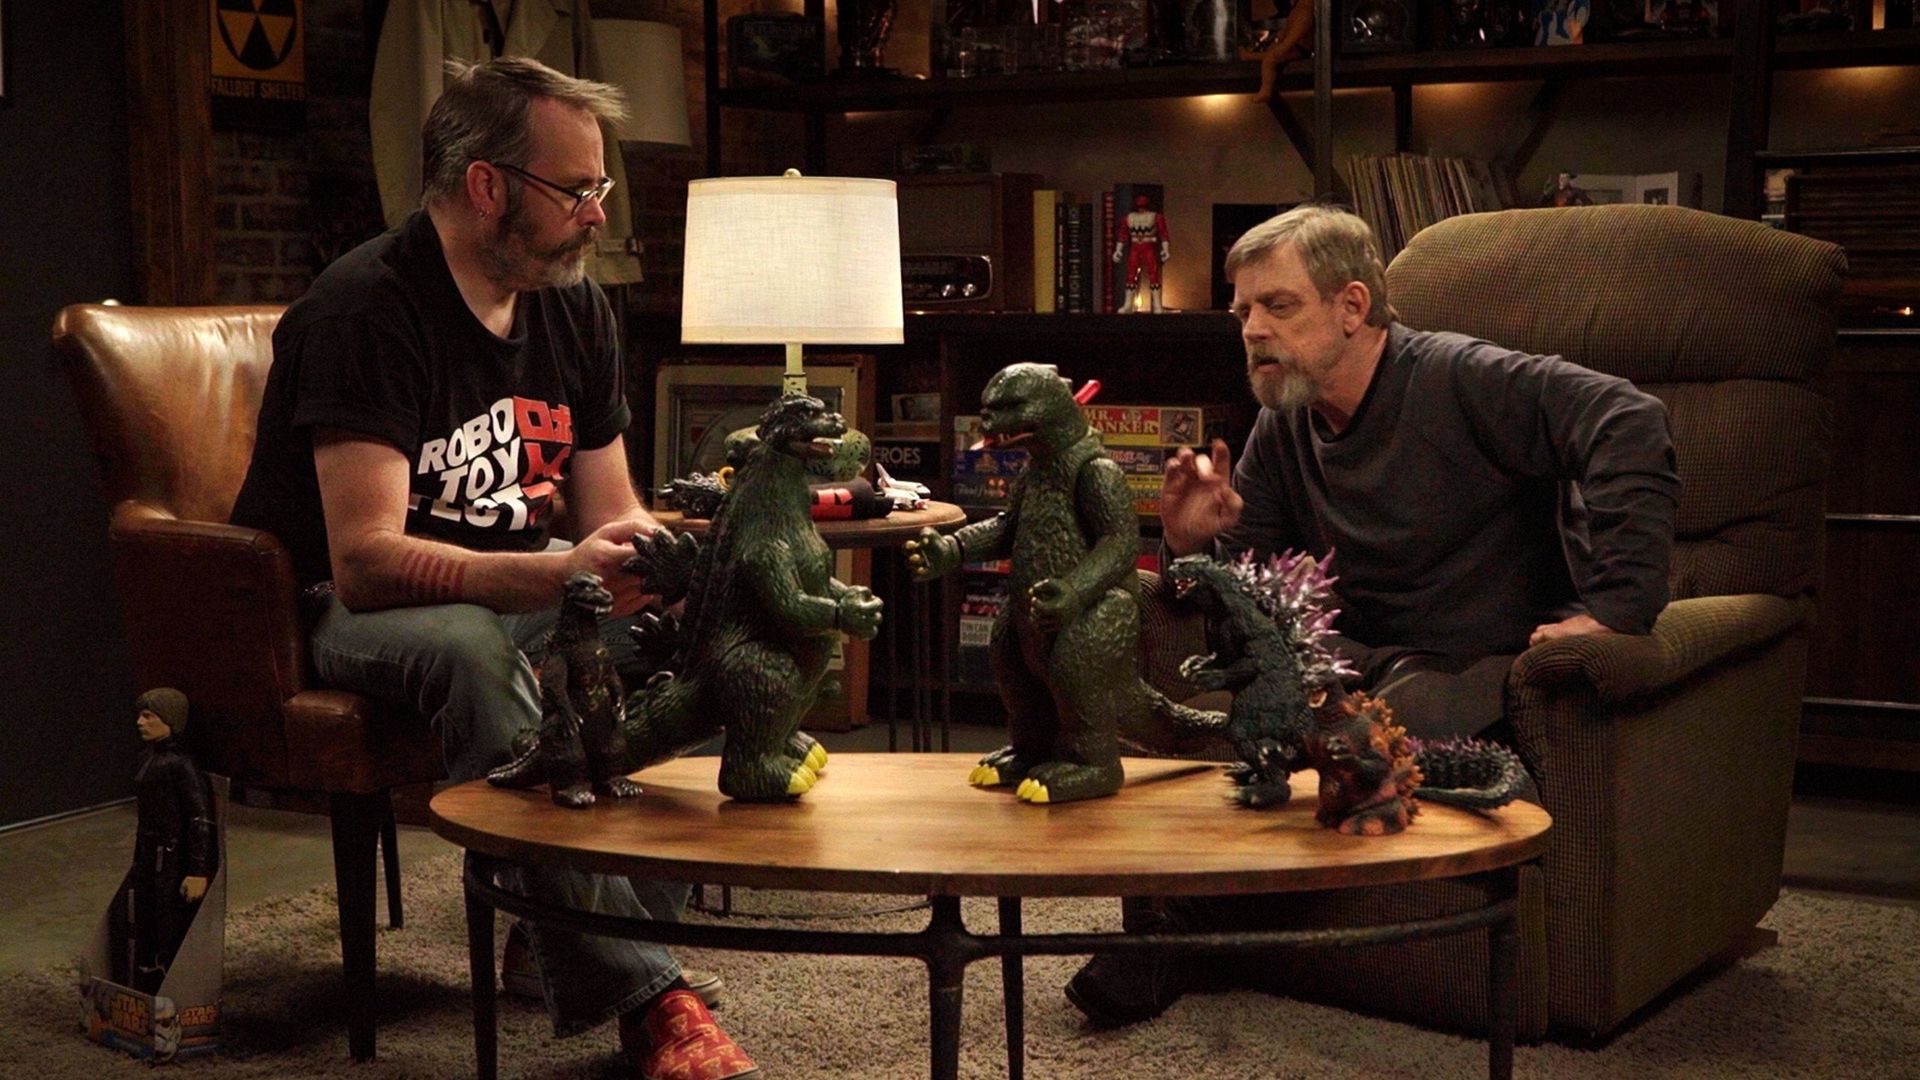 Mark Hamill's Pop Culture Quest background